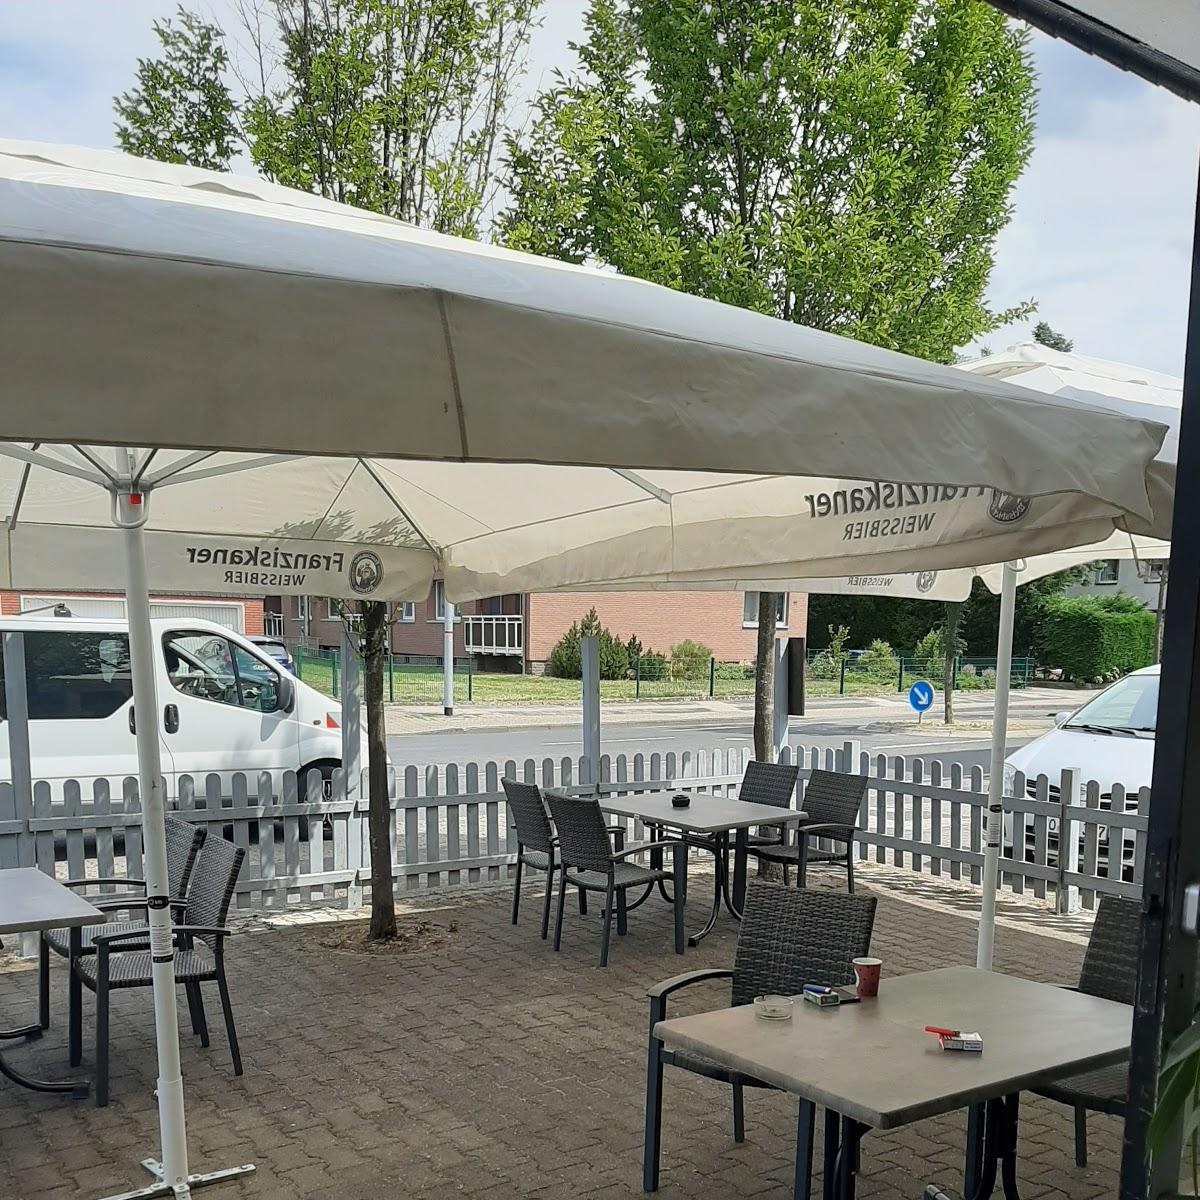 Restaurant "Thios Grill" in Moers